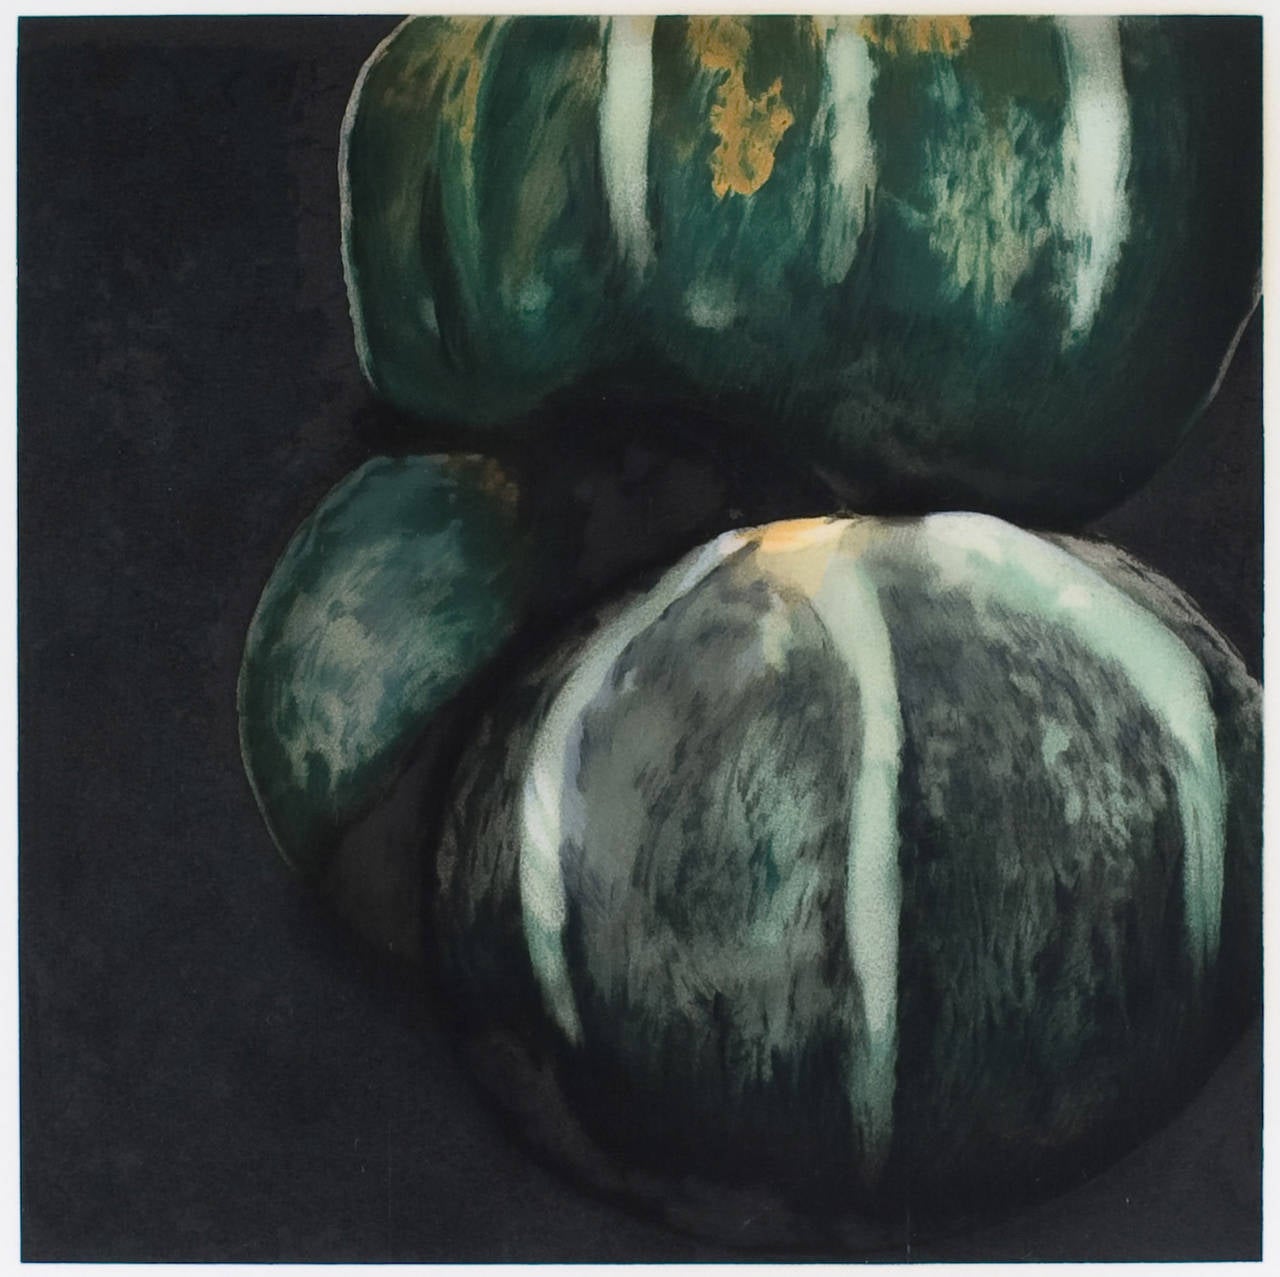 Donald Sultan Print - Squash from "Fruits and Flowers" 